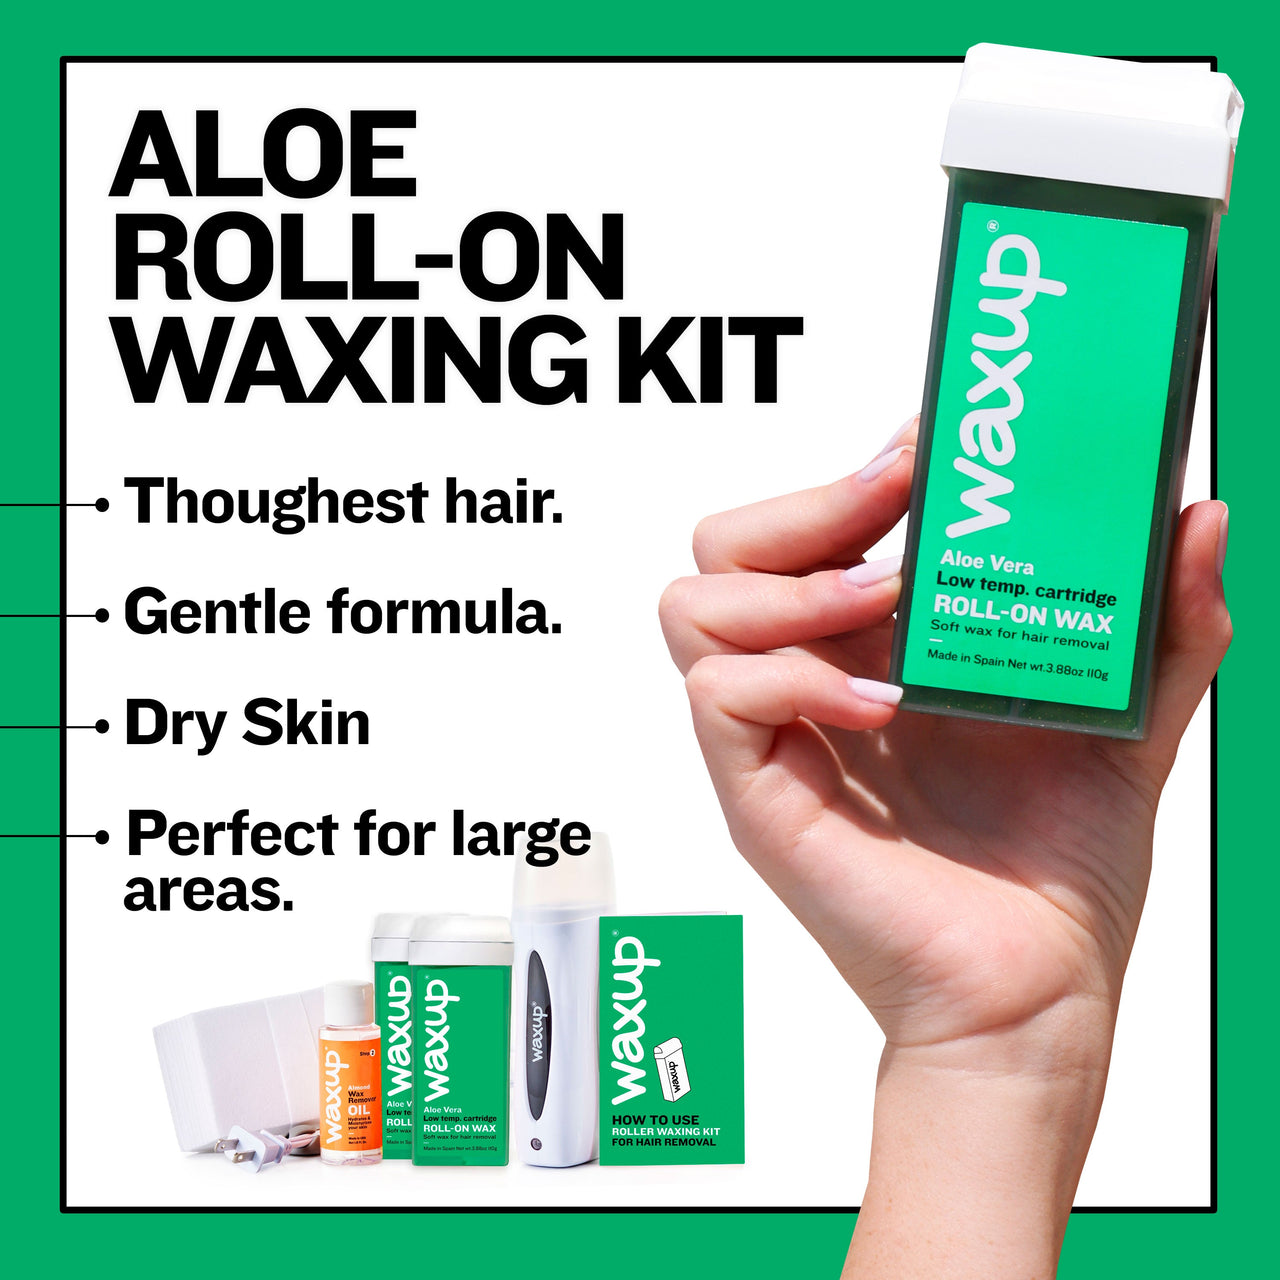 Aloe Roller Waxing Kit Buy with Prime - thatswaxup -  - Roller Waxing Kit - waxup hair removal wax body waxing kit women and men professional waxing supplies